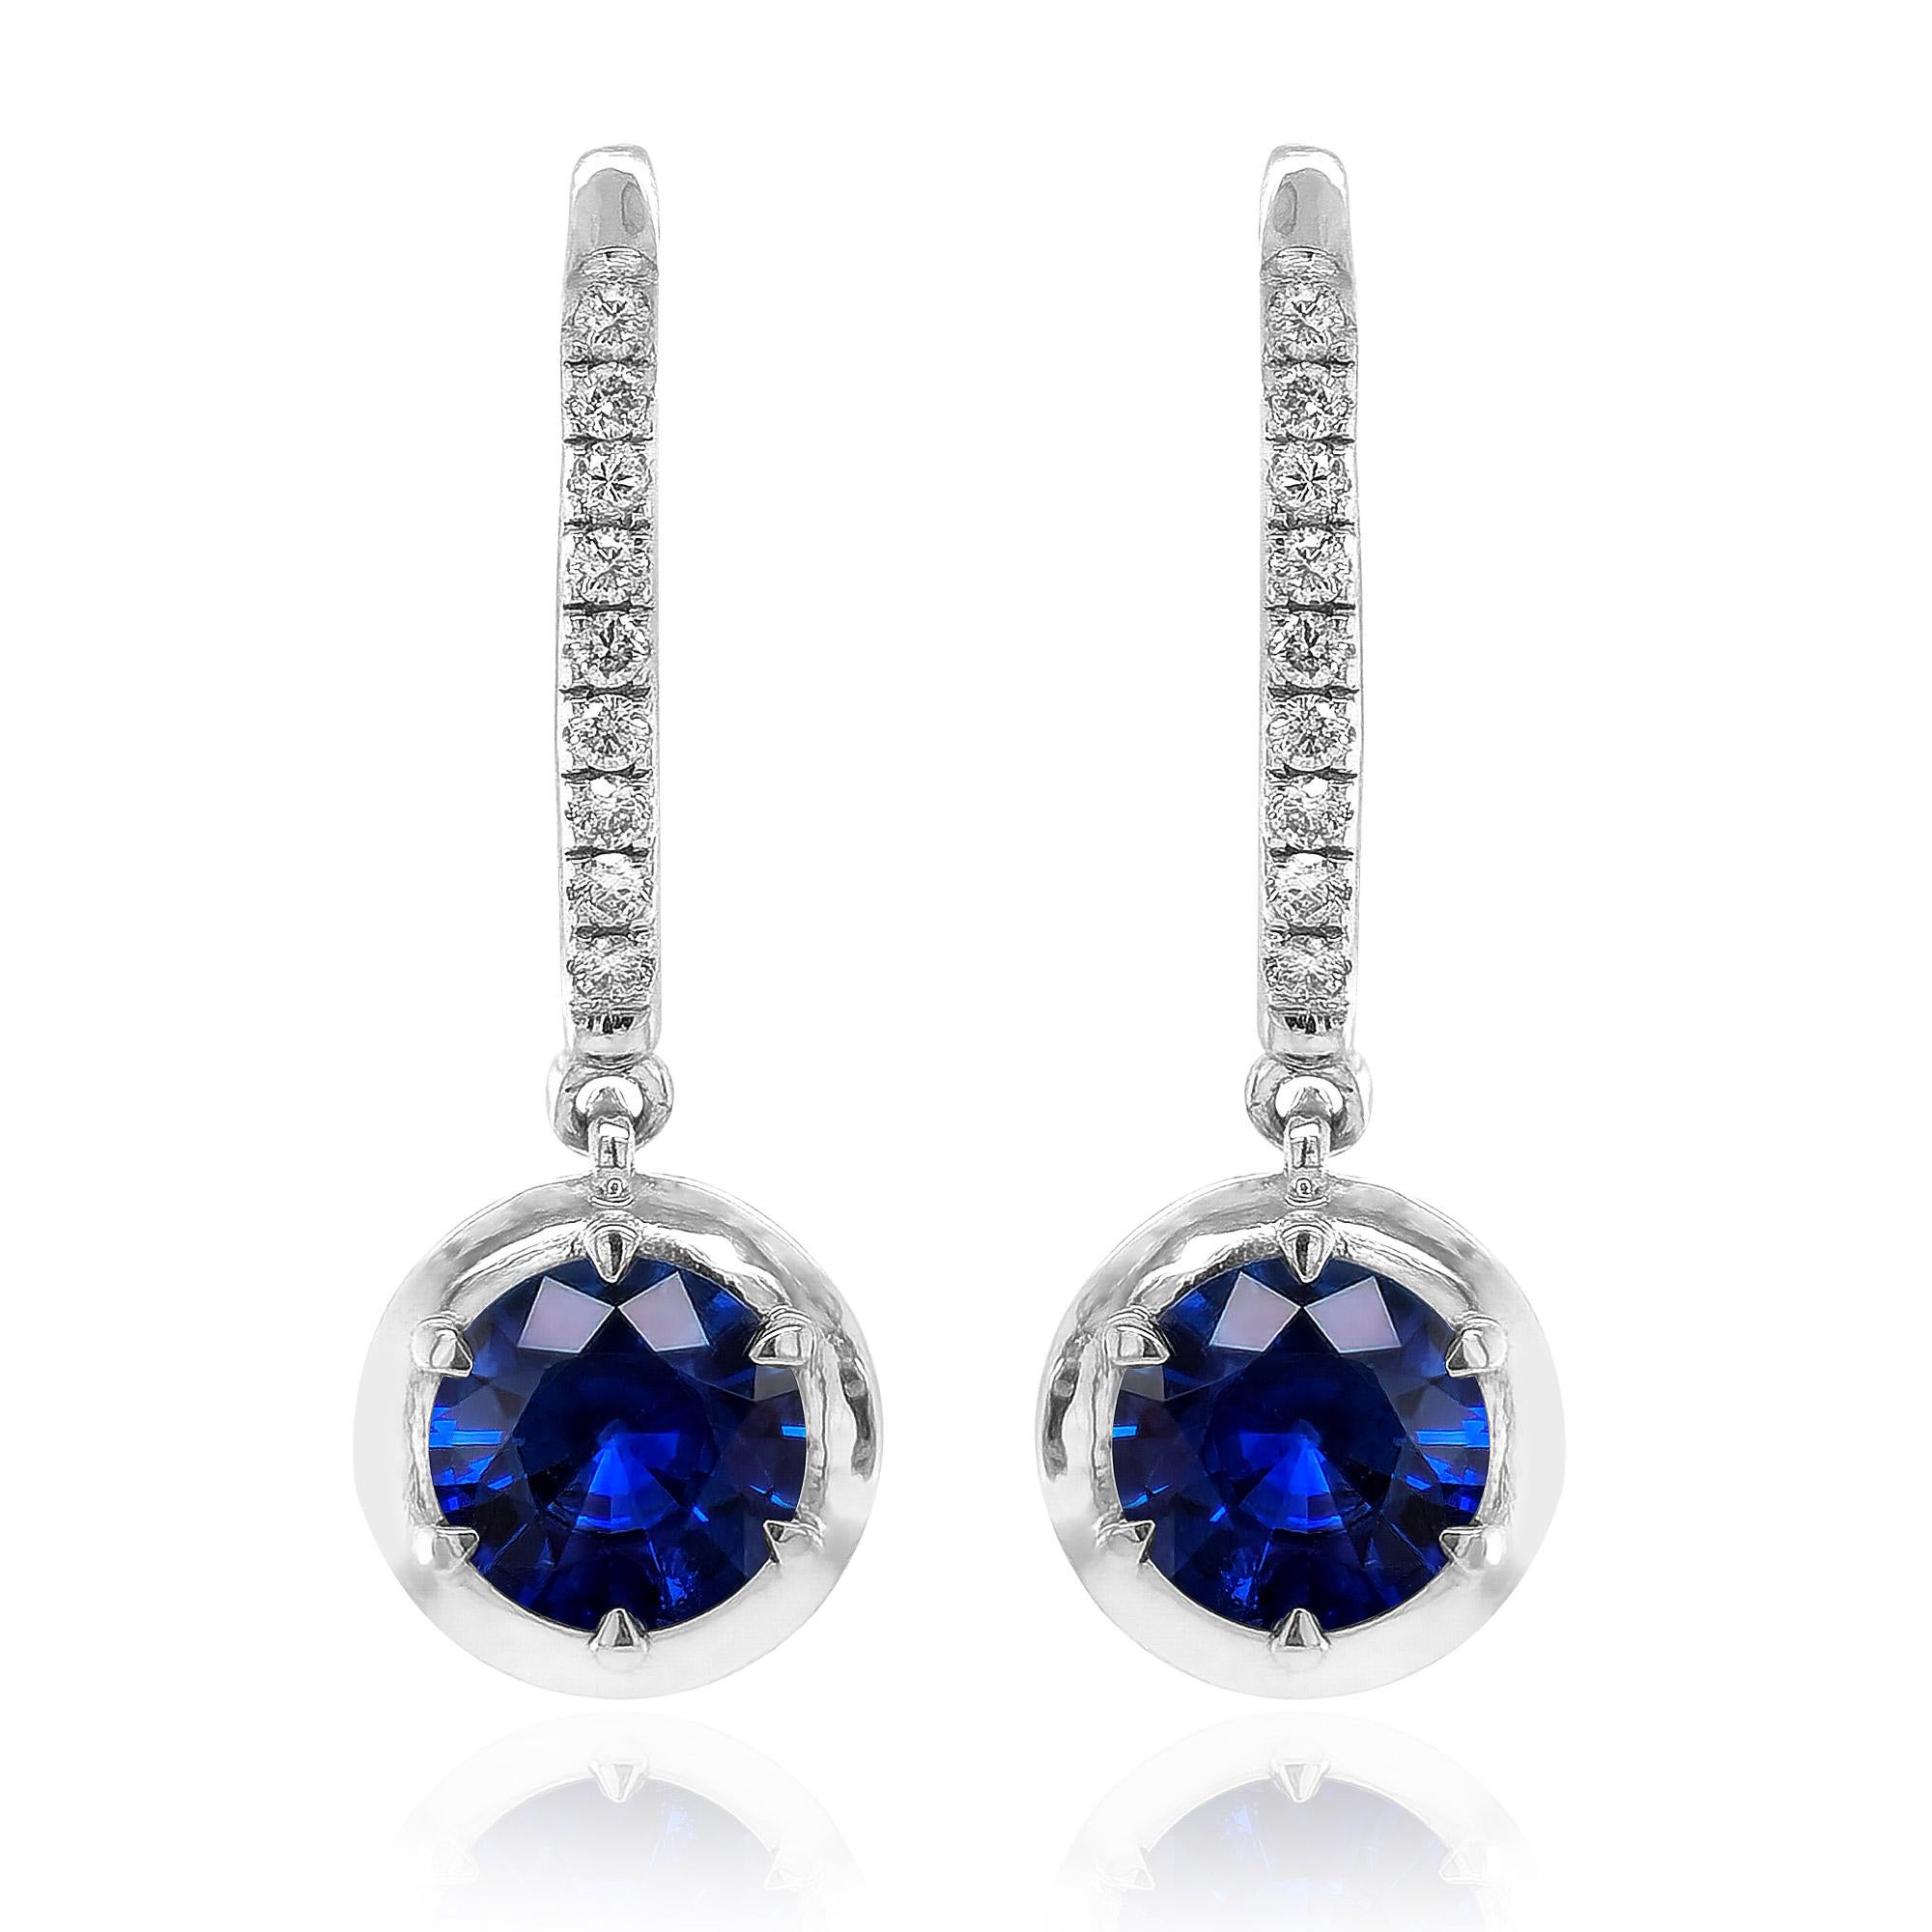 Mixed Cut Natural Blue Sapphires 2.60 Carats set in 14K White Gold Earrings with Diamonds For Sale